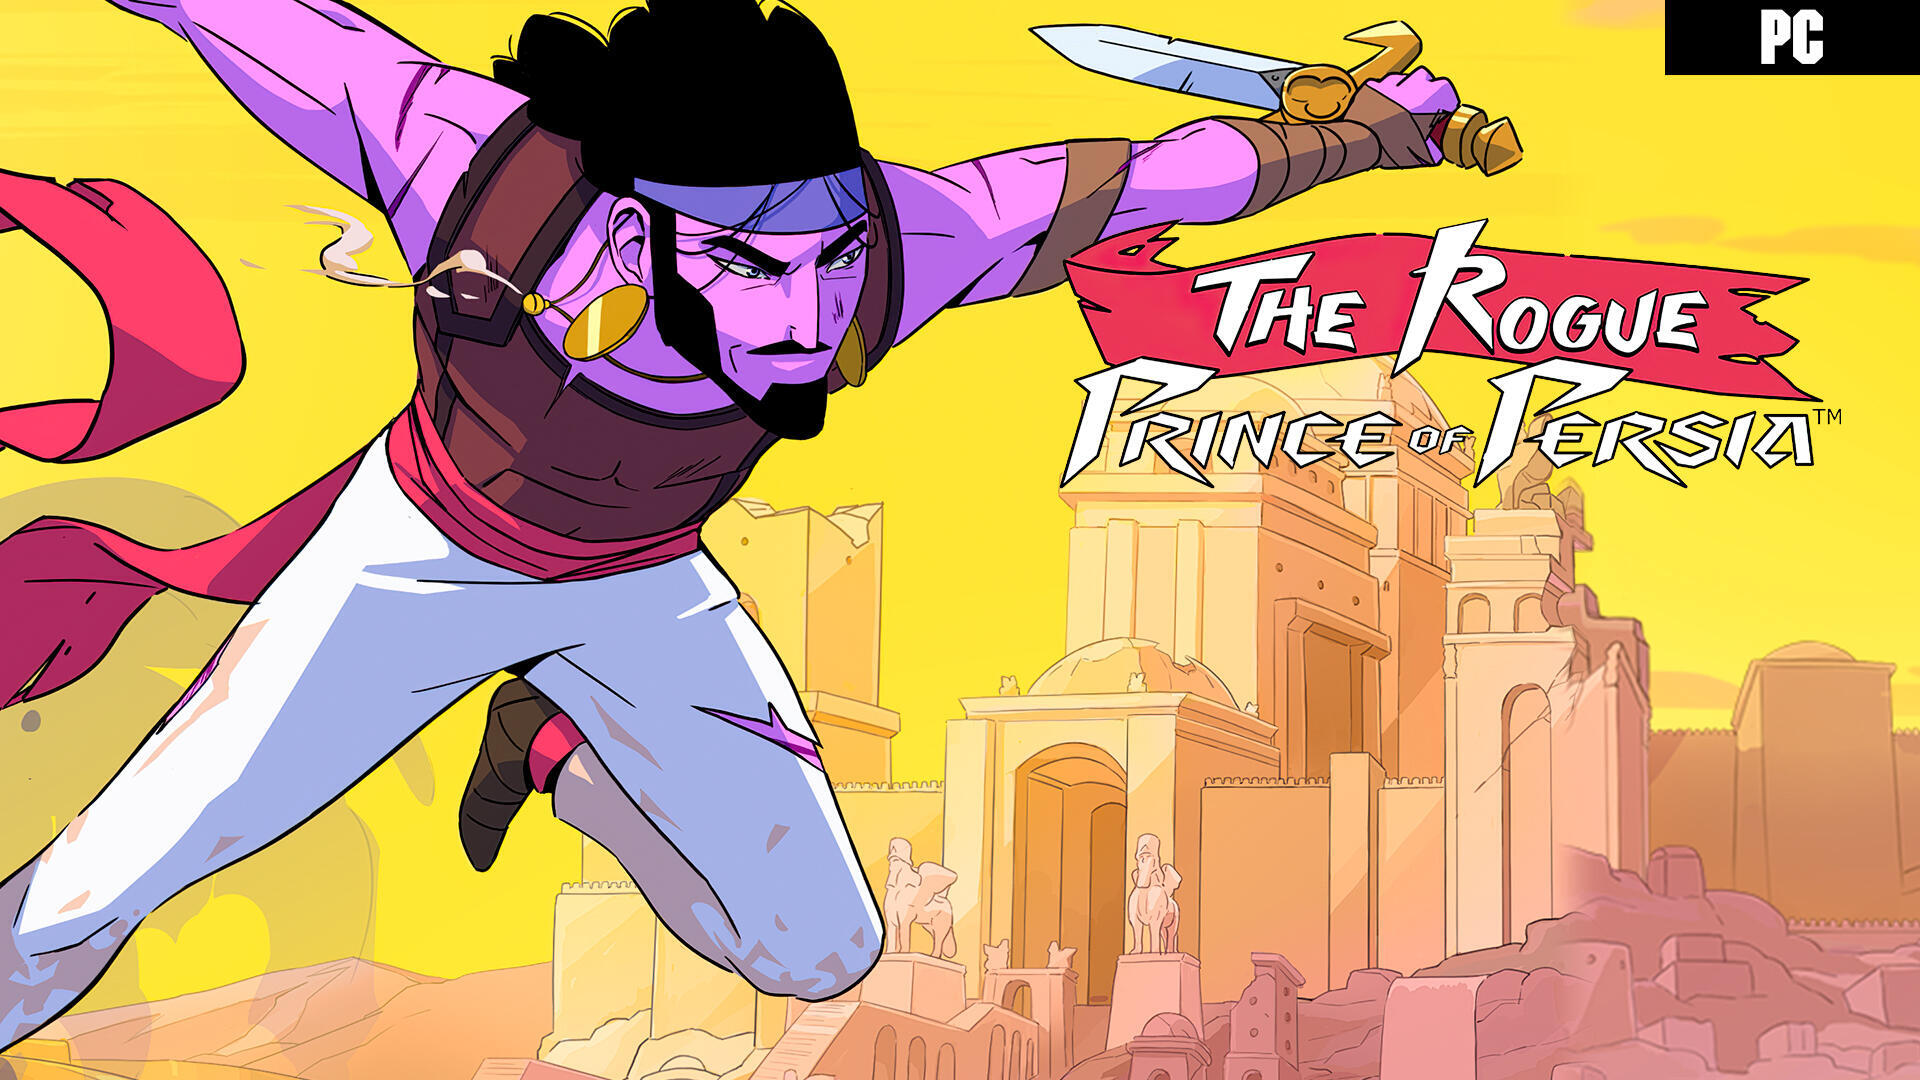 The Rogue Prince of Persia